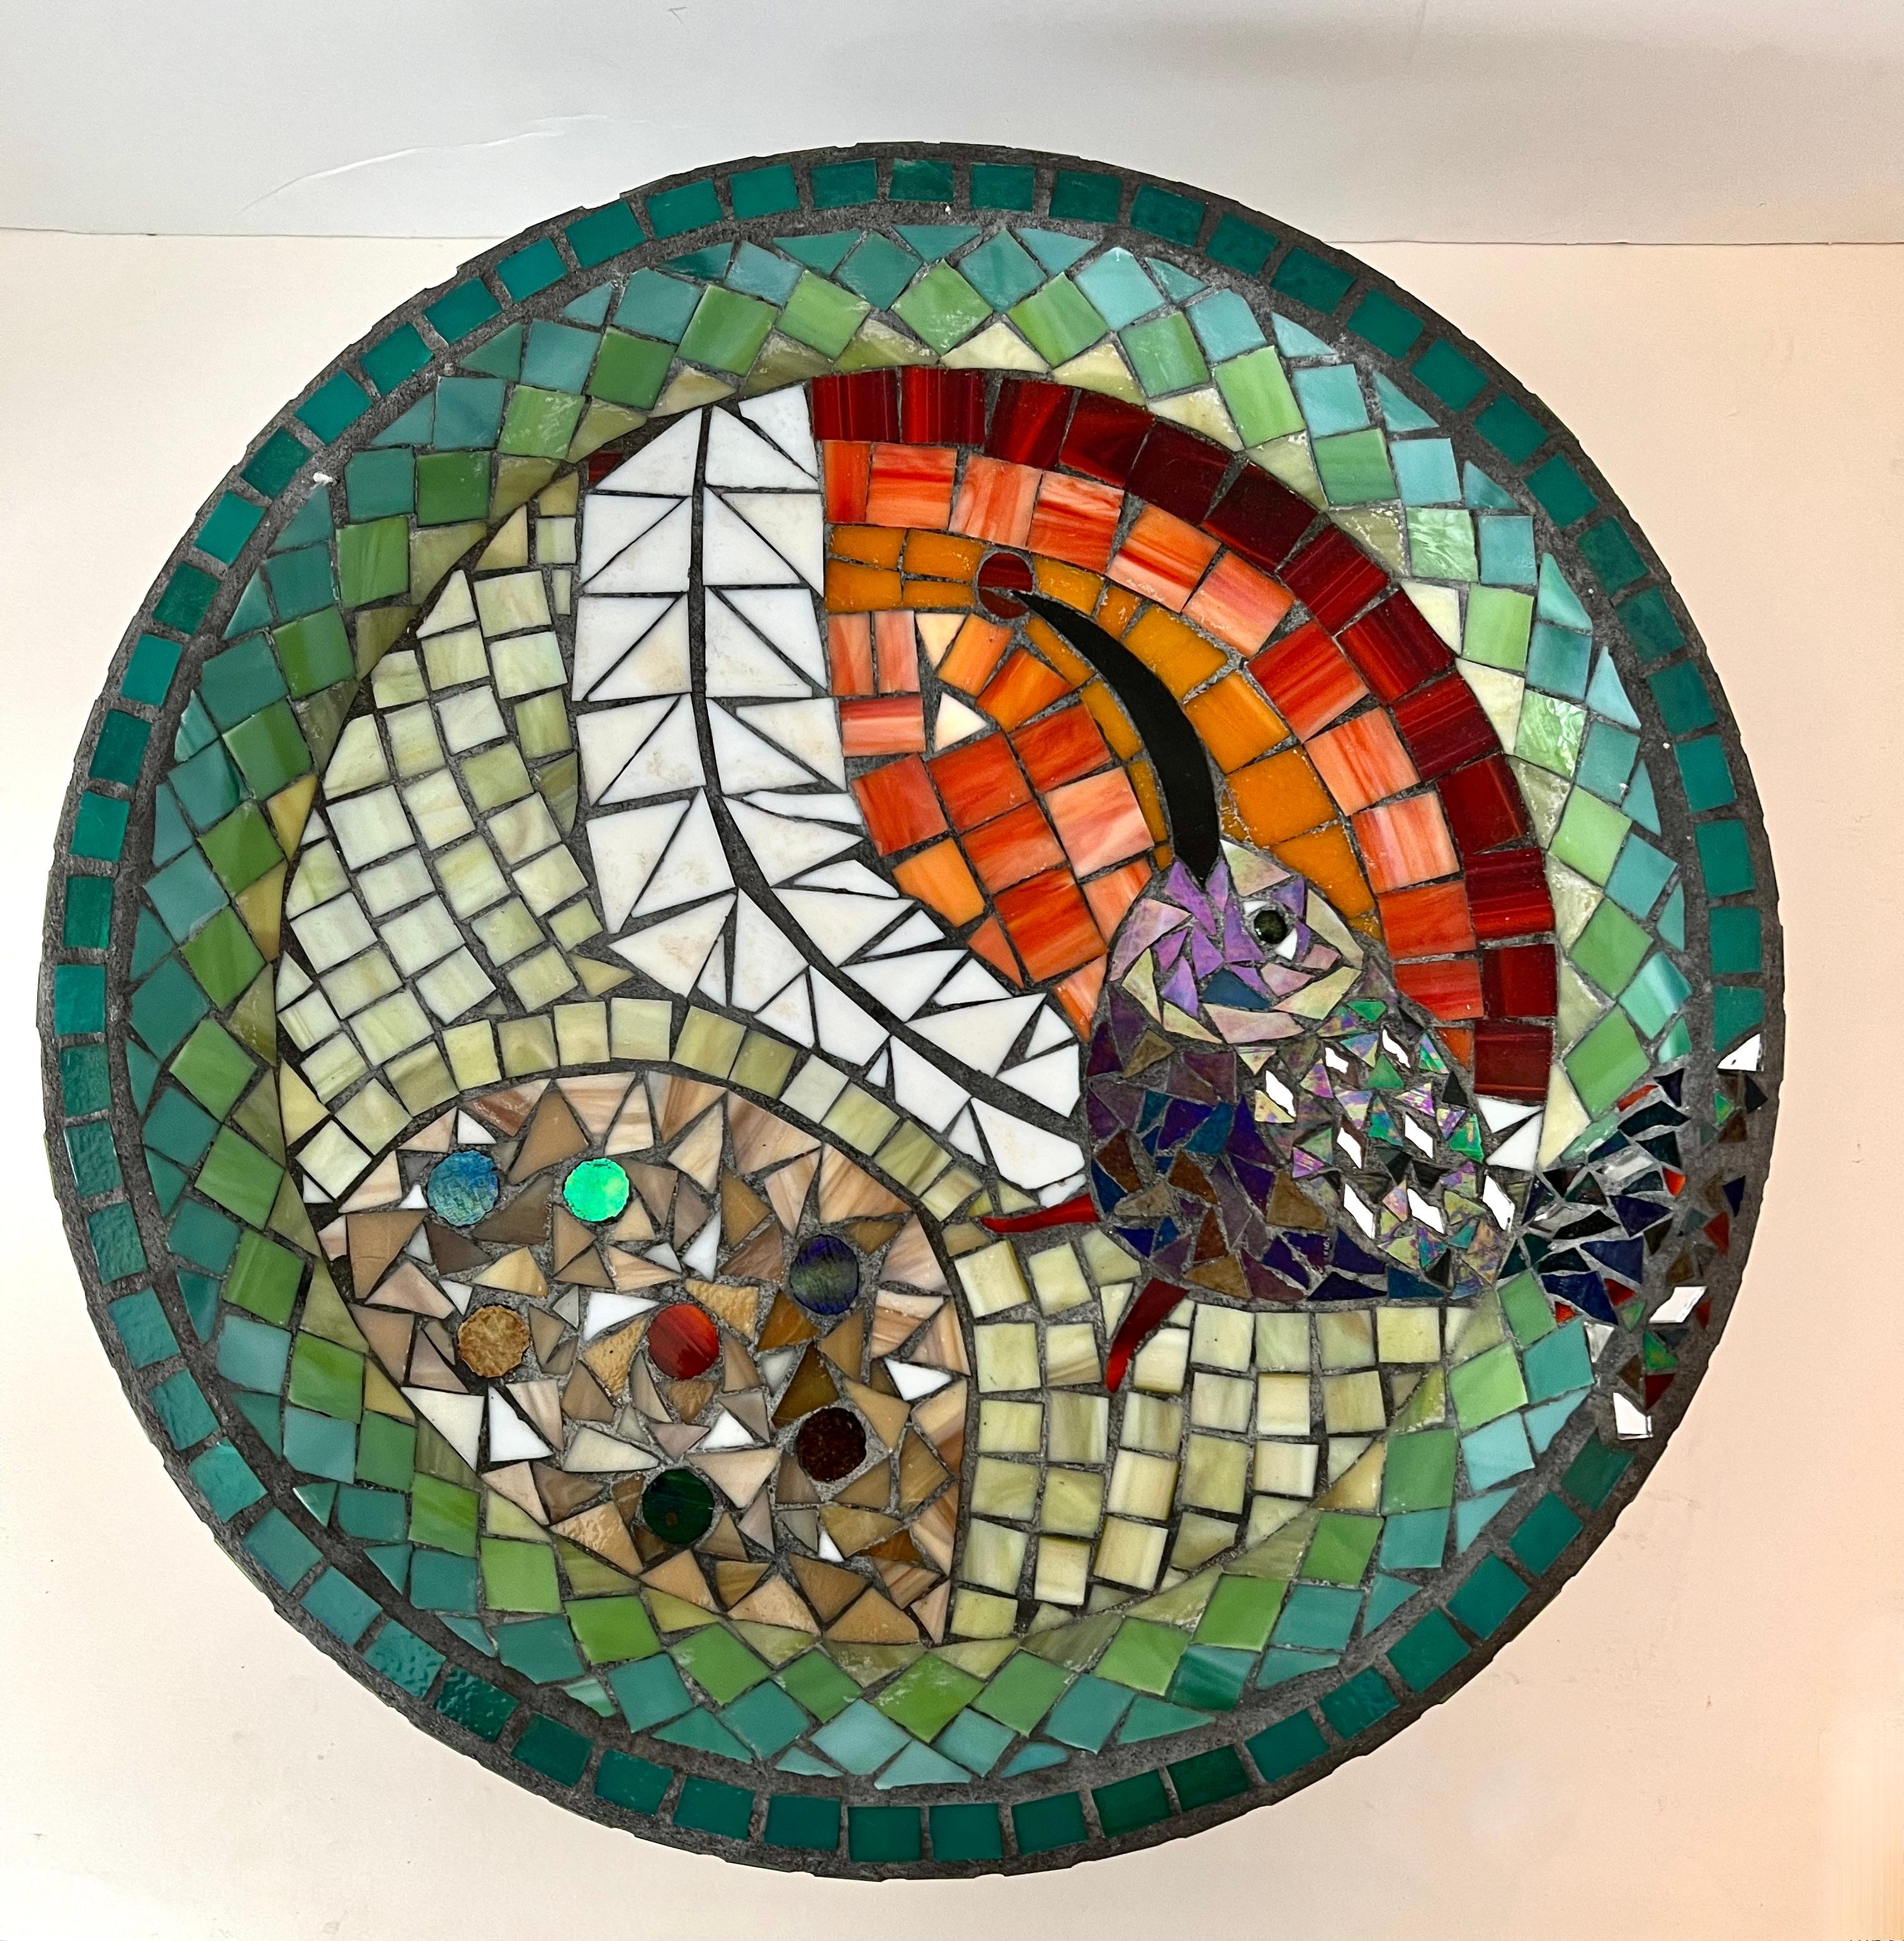 A unique mosaic tile birdbath on a base. The tiles are vibrant and cheerful - the imagery is whimsical yet sophisticated. A wonderful shallow bath for the birds, but could also be used as a place to put an equally interesting planter.

Hand made